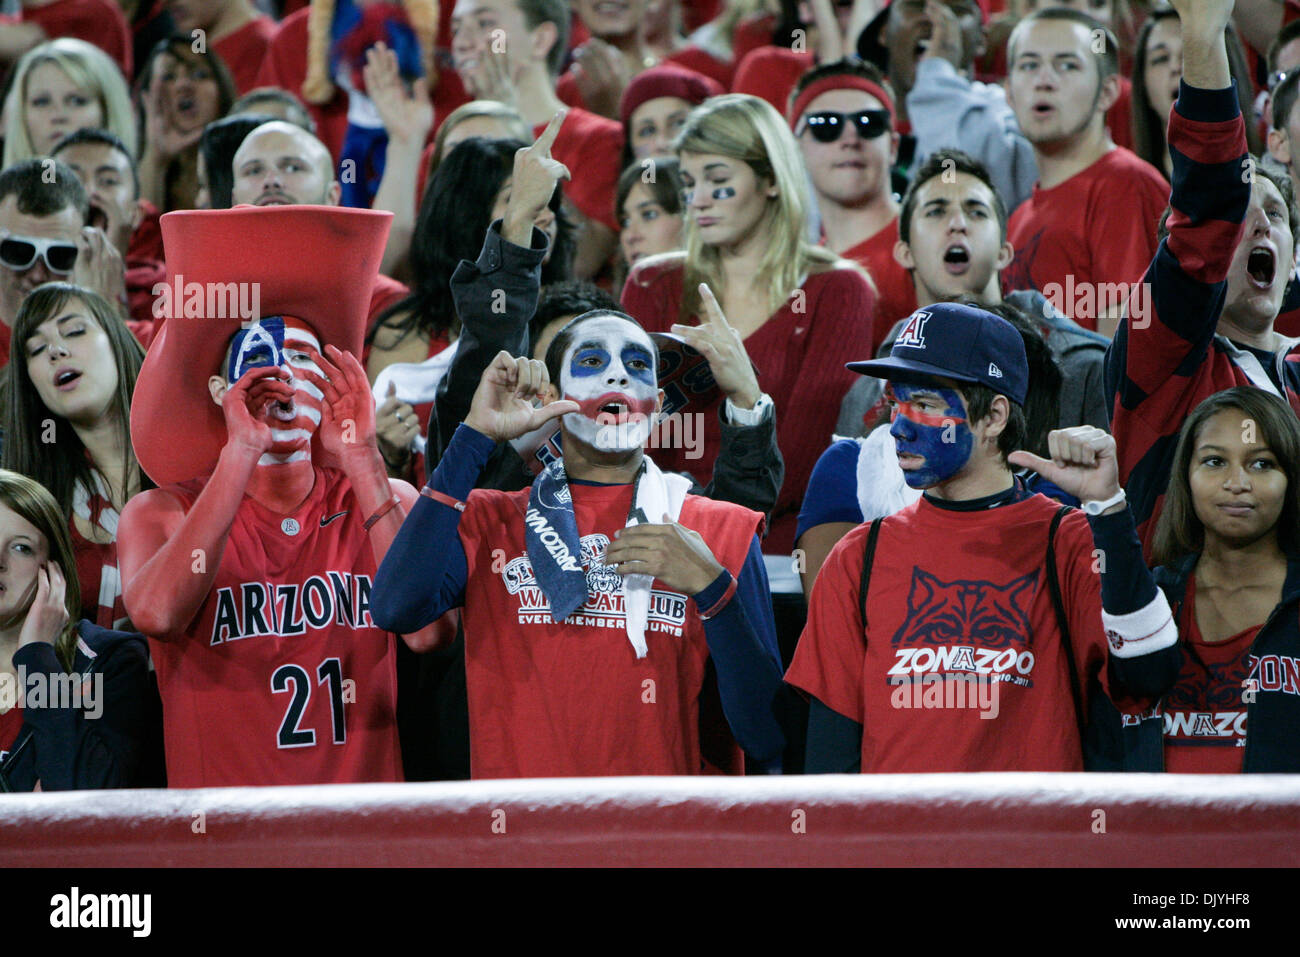 Dec. 2, 2010 - Tucson, Arizona, USA - Arizona Fans coagulate in a sea of red during the big interstate rivalry. Arizona State defeated Arizona 30-29 in a double overtime thriller. (Credit Image: © Dean Henthorn/Southcreek Global/ZUMAPRESS.com) Stock Photo